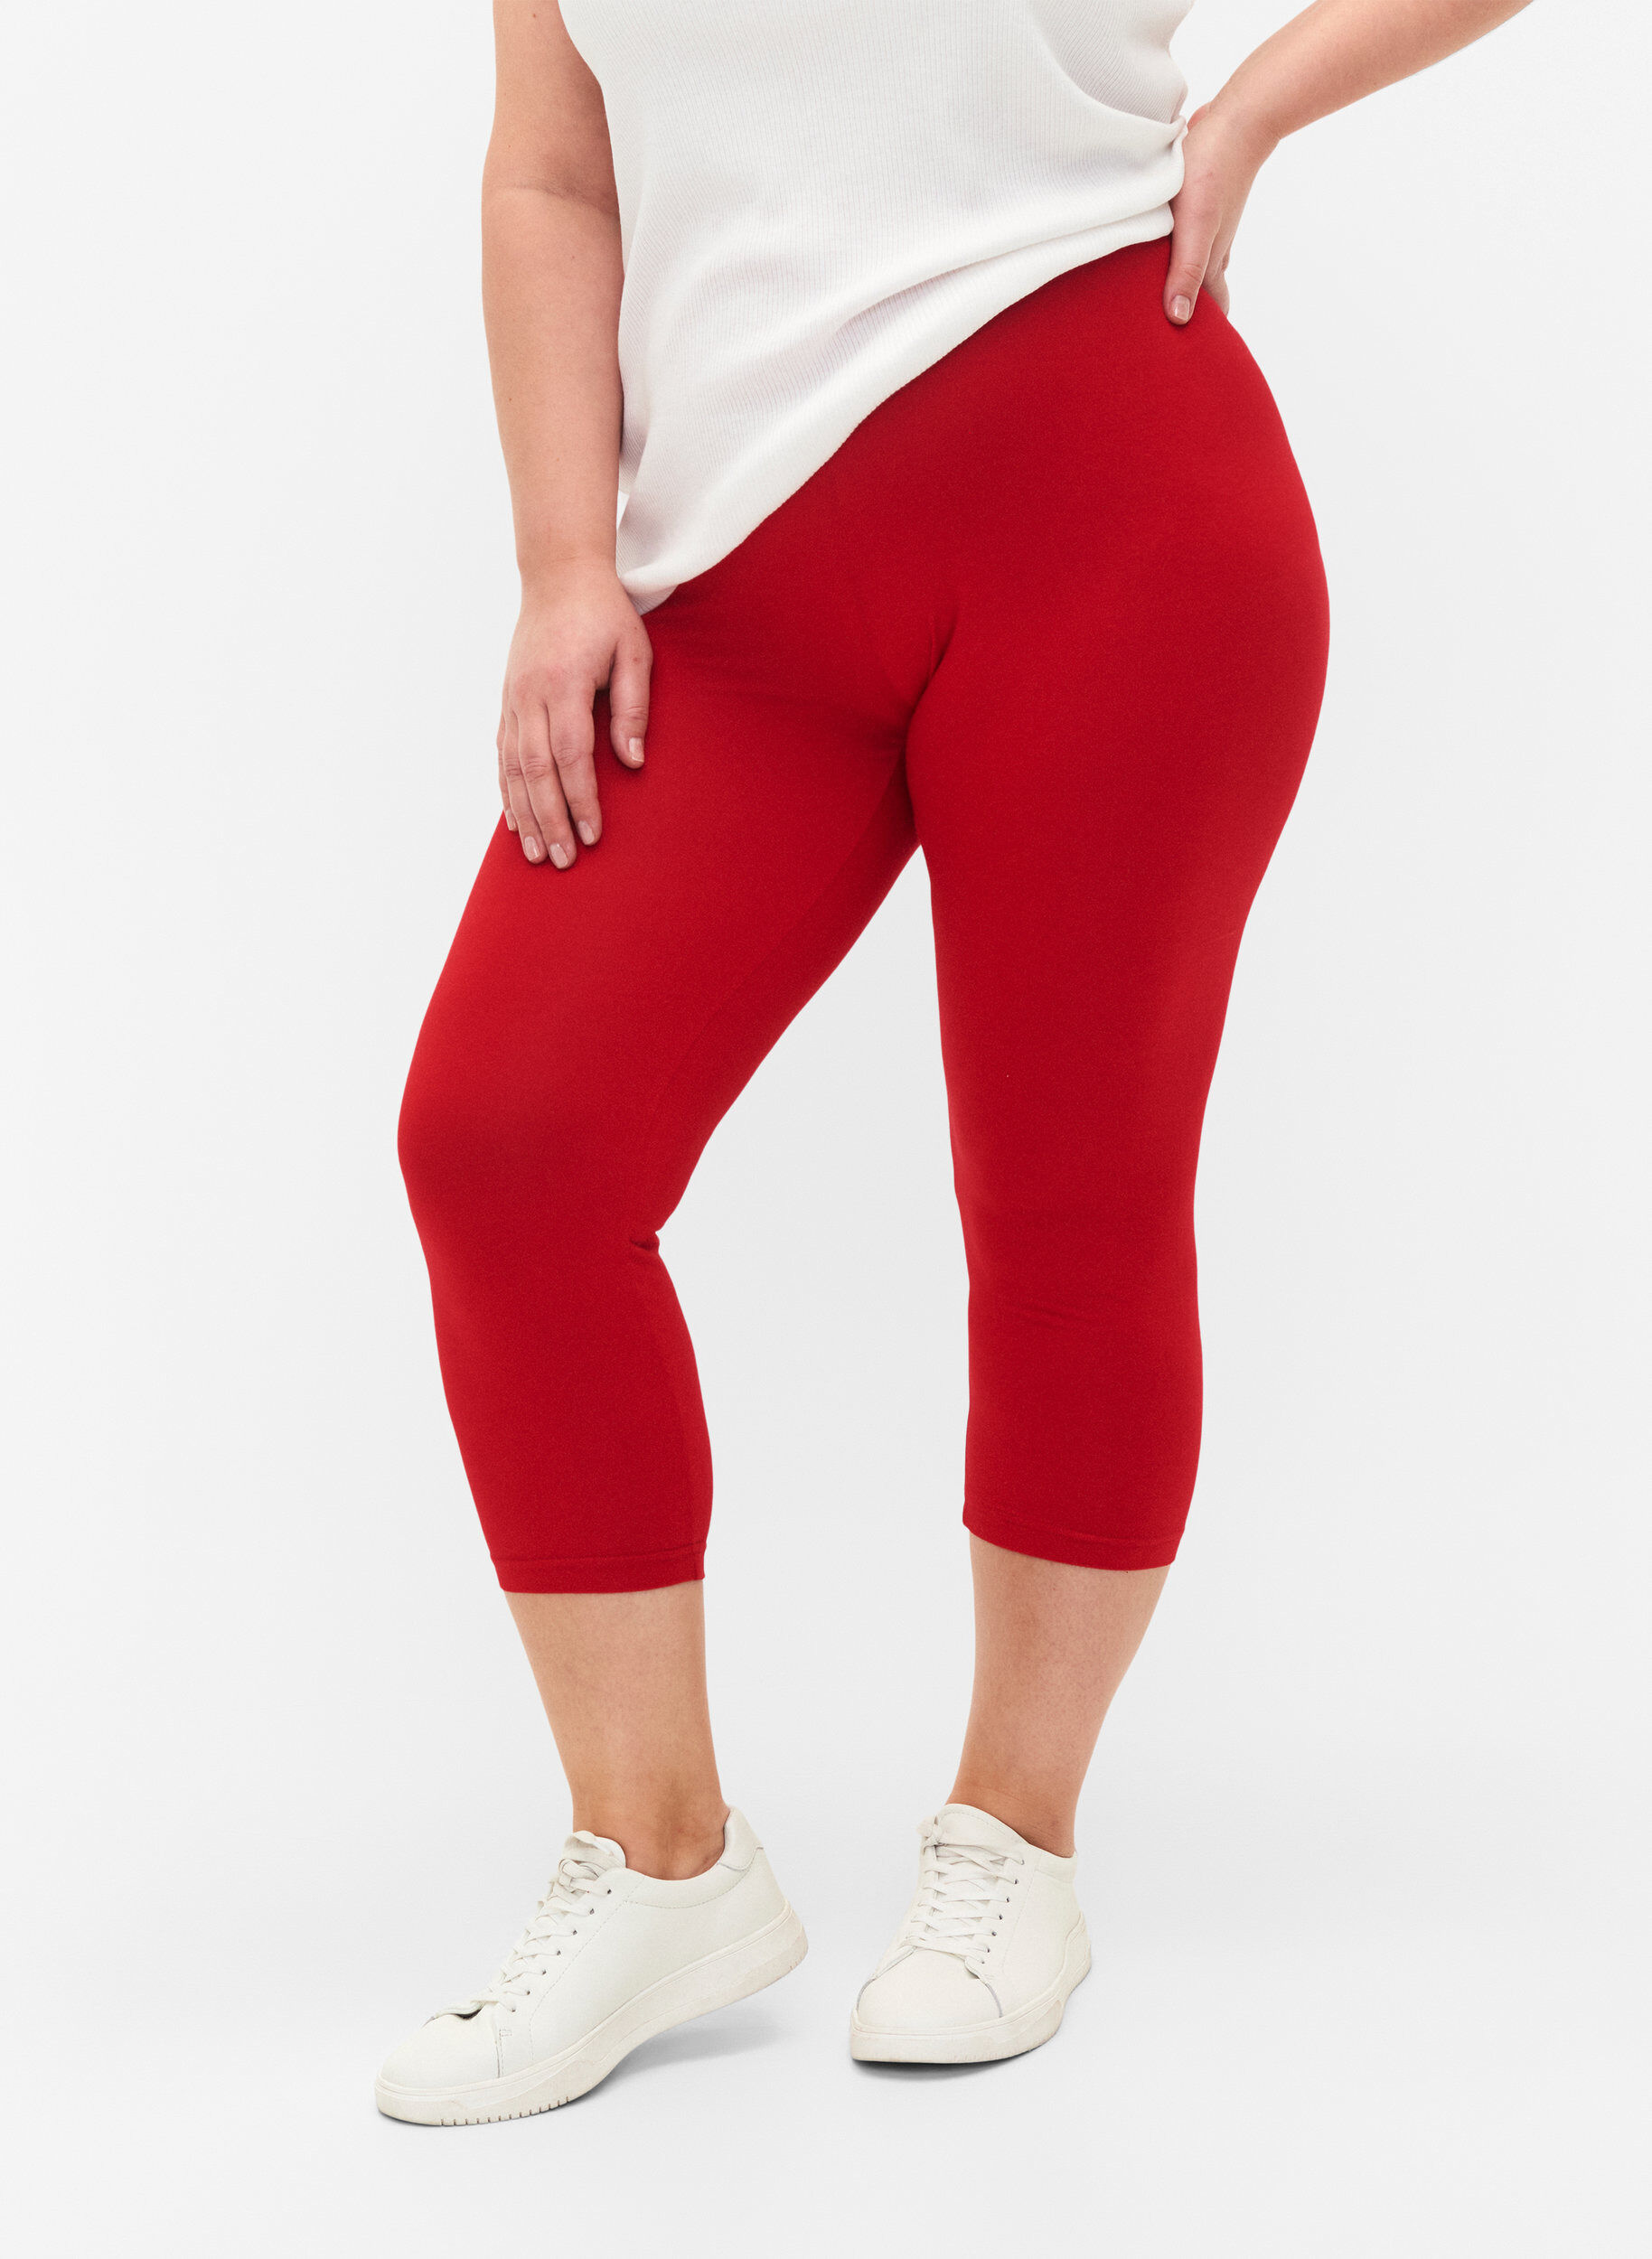 Update more than 105 viscose leggings meaning